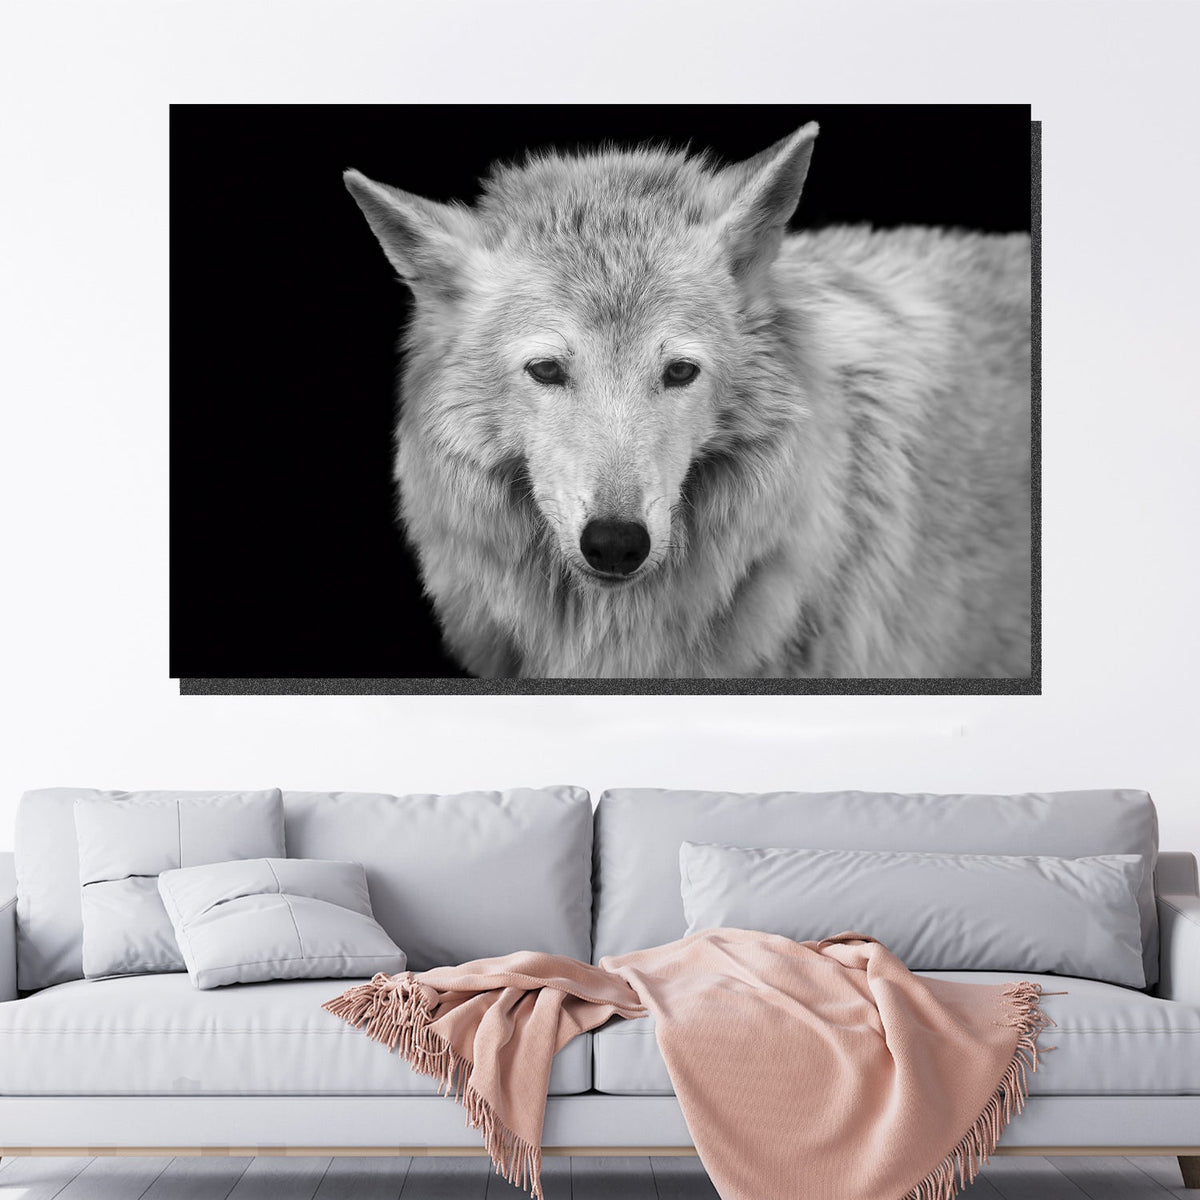 https://cdn.shopify.com/s/files/1/0387/9986/8044/products/WildForestWolfCanvasArtprintStretched-3.jpg